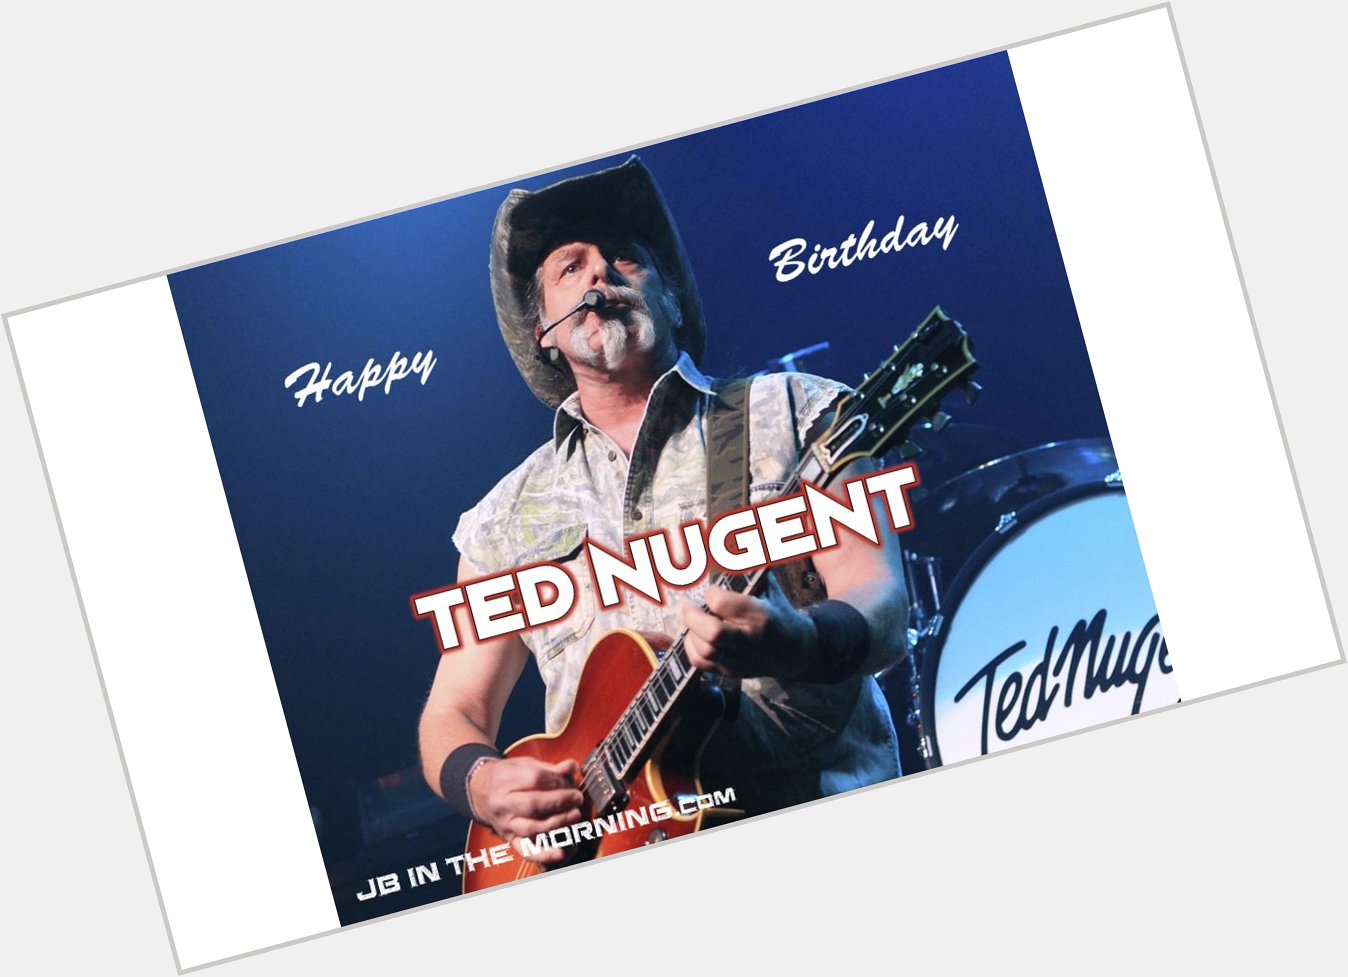 Happy Birthday Ted Nugent!
74 years young  With a \"Stranglehold\" on Life.  